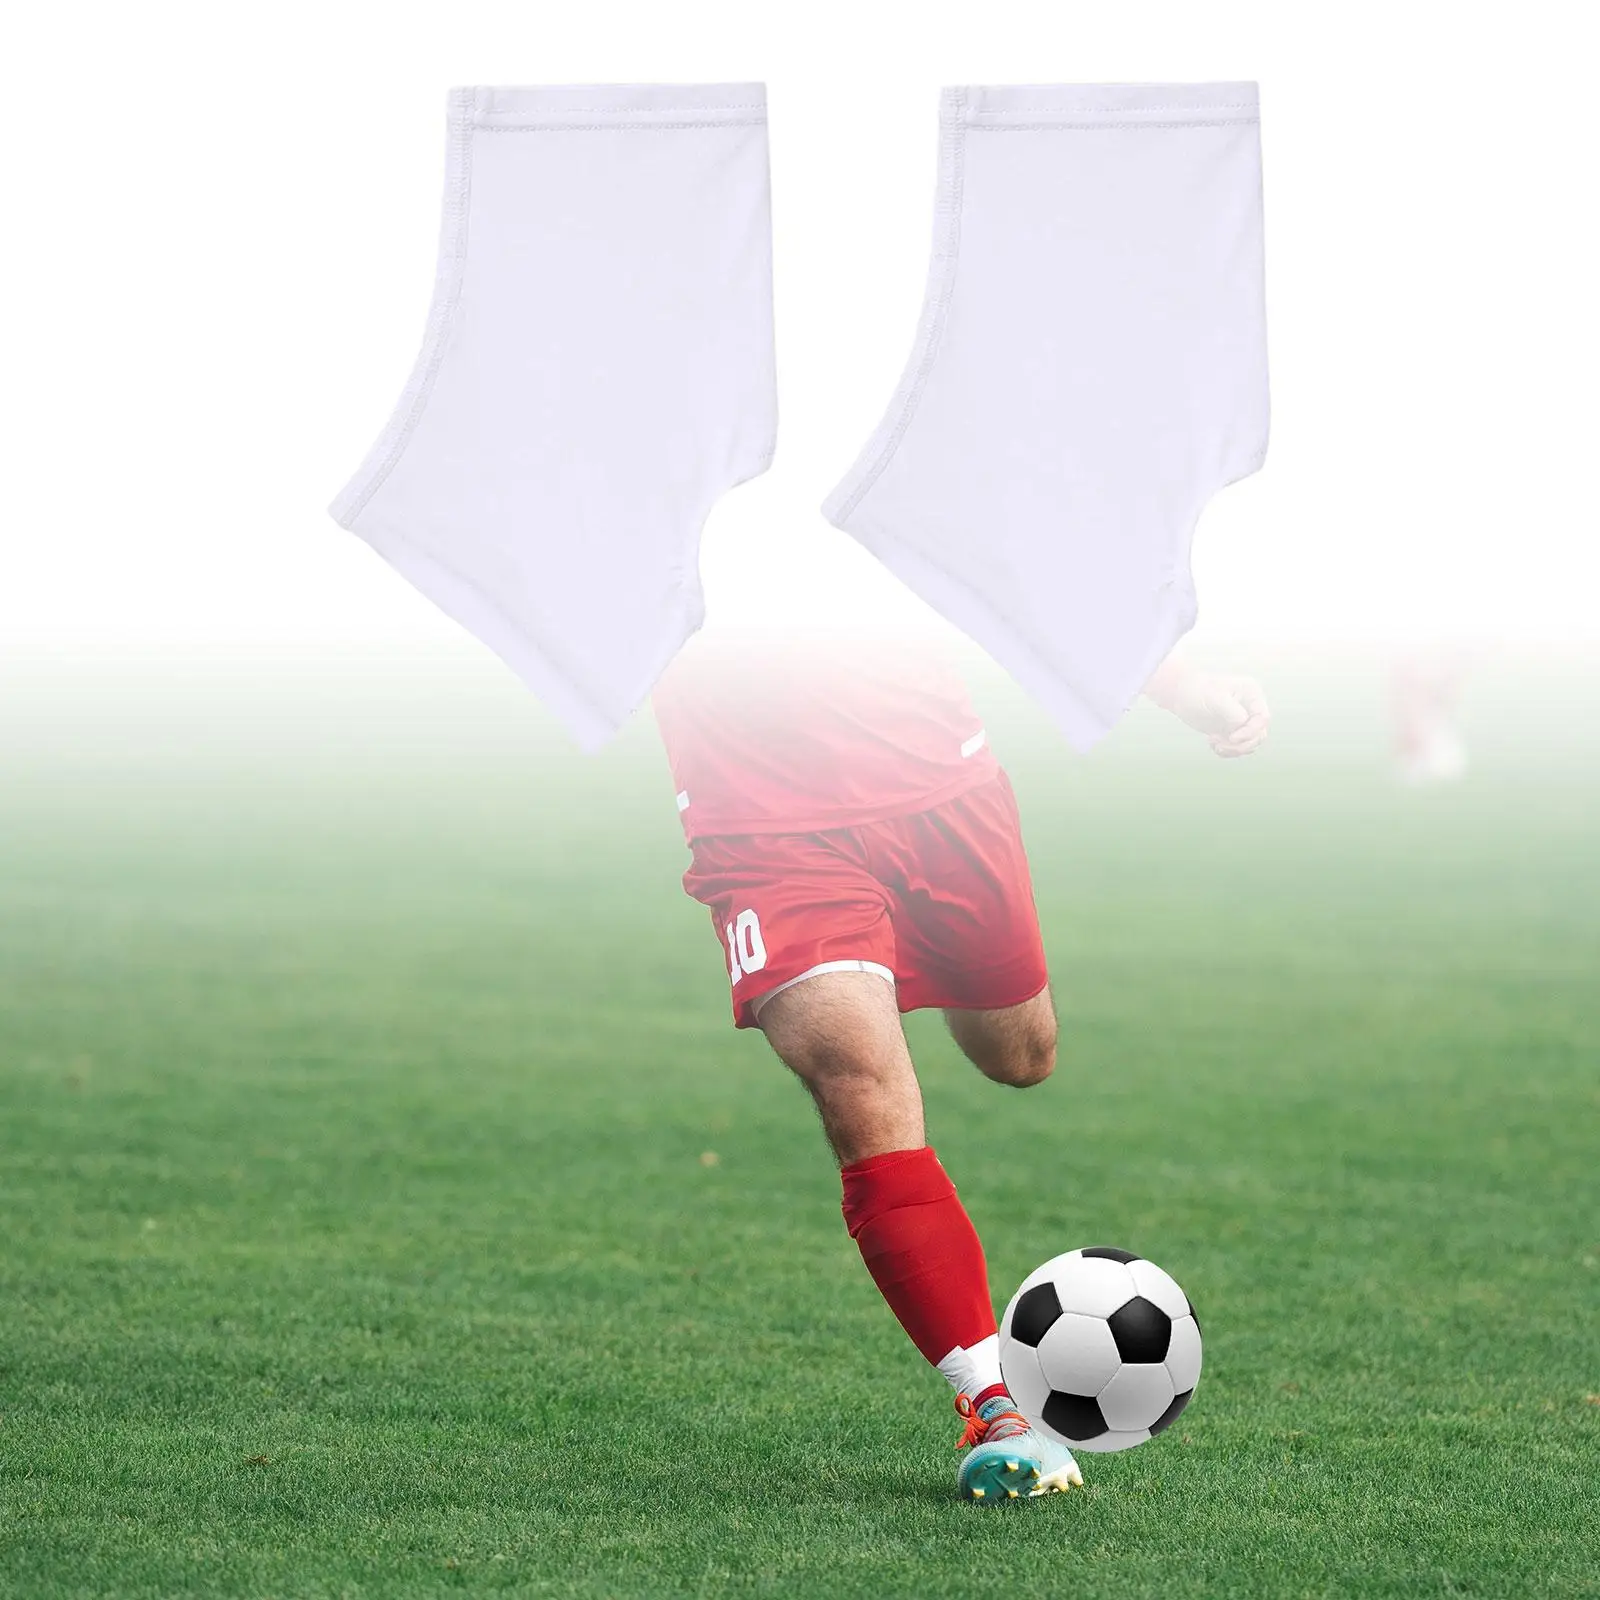 2Pcs Spats Reusable Softball Teenagers Keeps Cleats Tied Turf Pellets Out 1 Pair Elastic Cleat Sleeves Cleat Covers Sports Spats